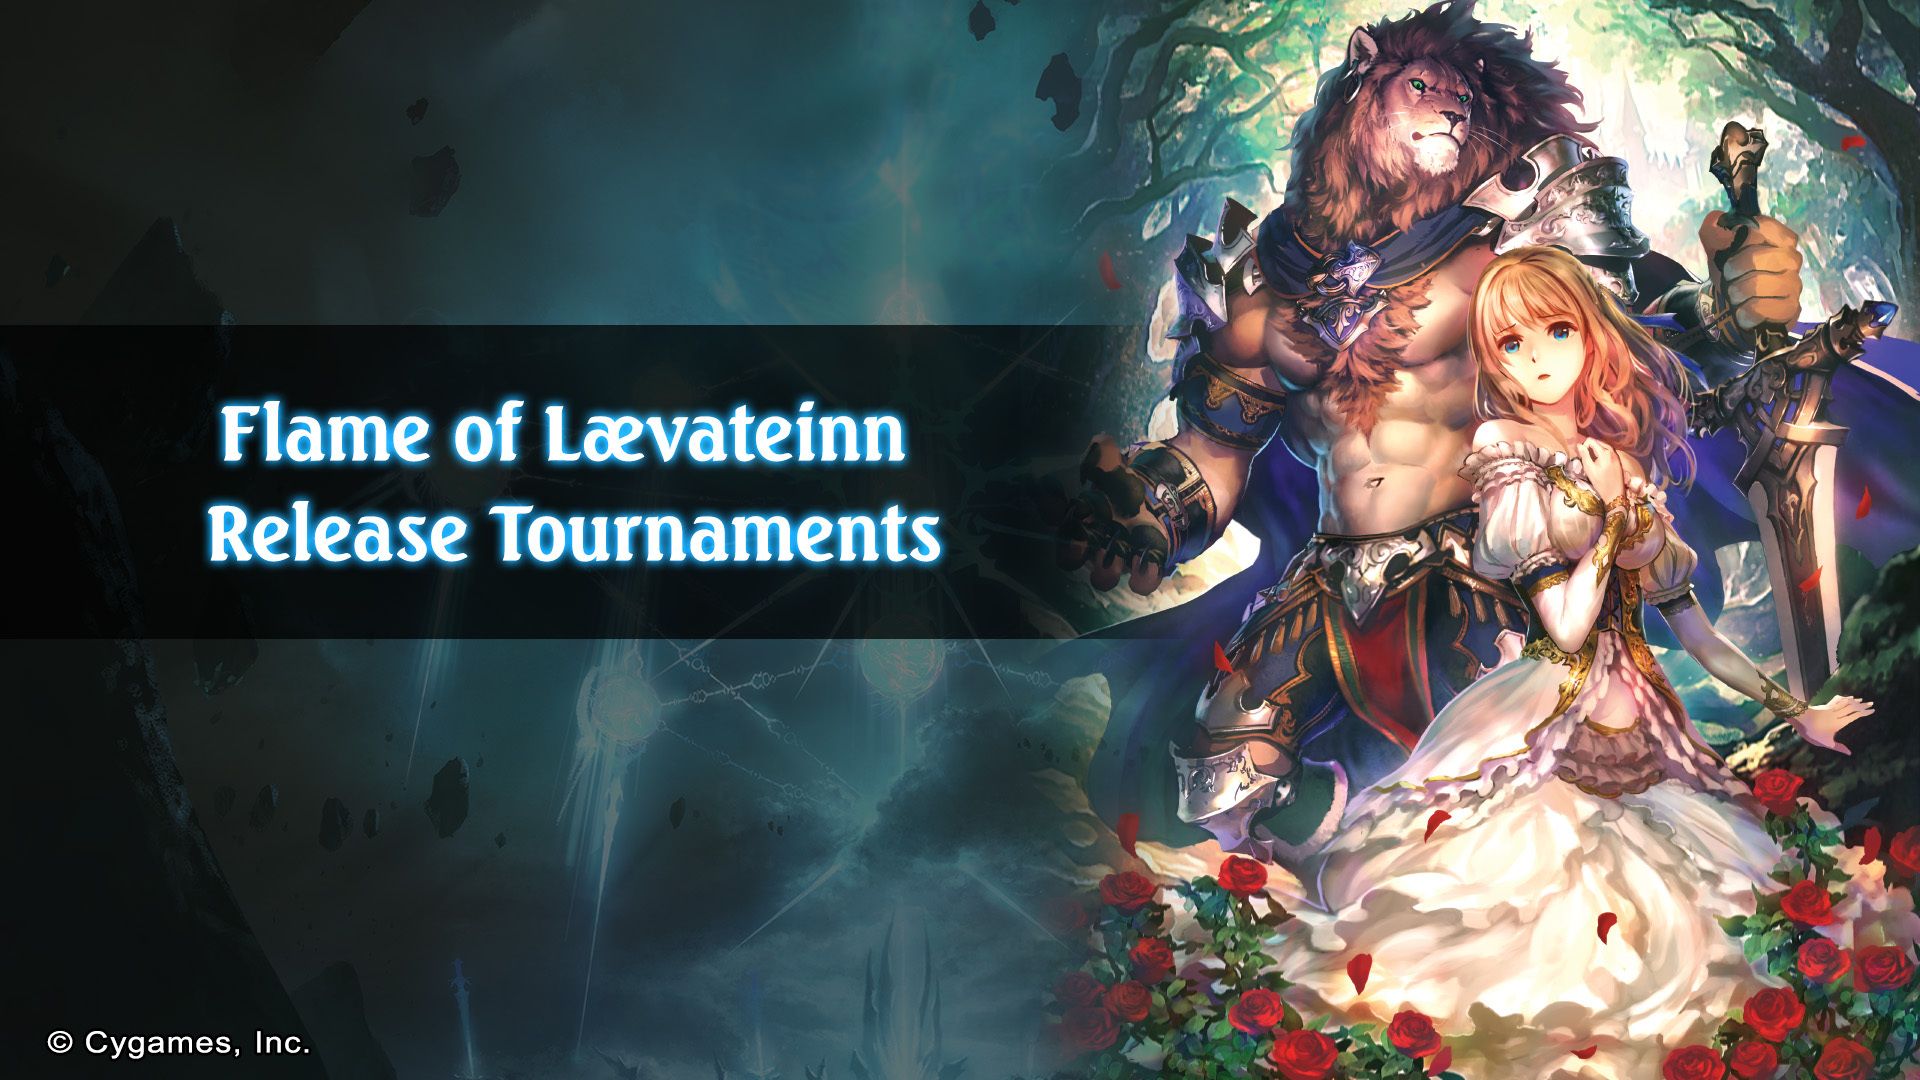 Flame of Lævateinn Release Tournaments